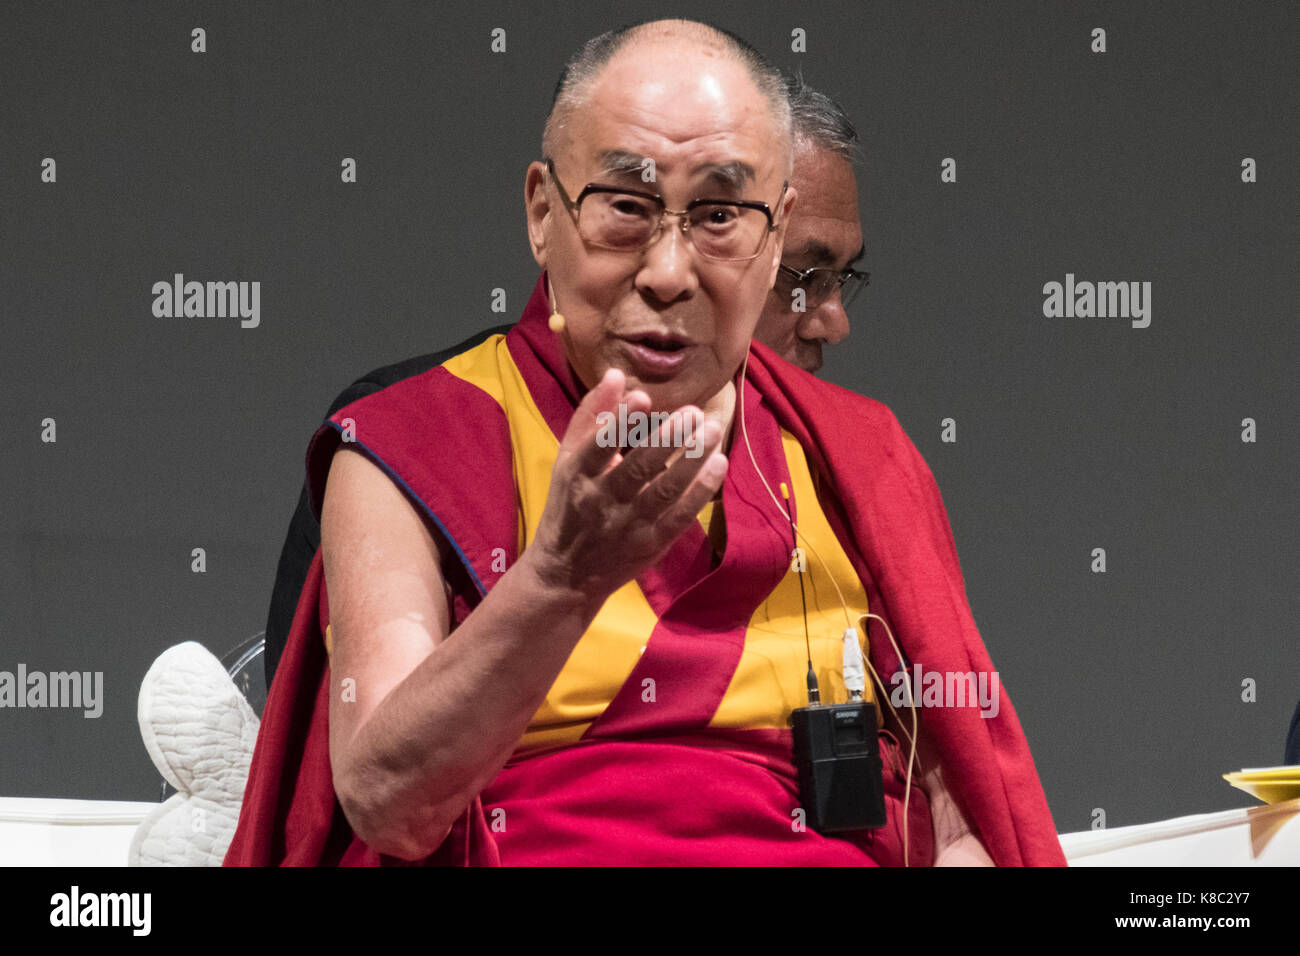 Palermo, Italy. 18th Sep, 2017. The conference in Palermo of the XIV Dalai Lama Tenzin Gyatso. XIV Dalai Lama Tenzin Gyatso returns to Palermo. Joy as an inspiration to invoke peace. After more than twenty years, XIV Dalai Lama Tenzin Gyatso, Tibet's spiritual leader and Nobel Peace Prize, returns to the city of Palermo. Credit: Gianfranco Spatola/Pacific Press/Alamy Live News Stock Photo